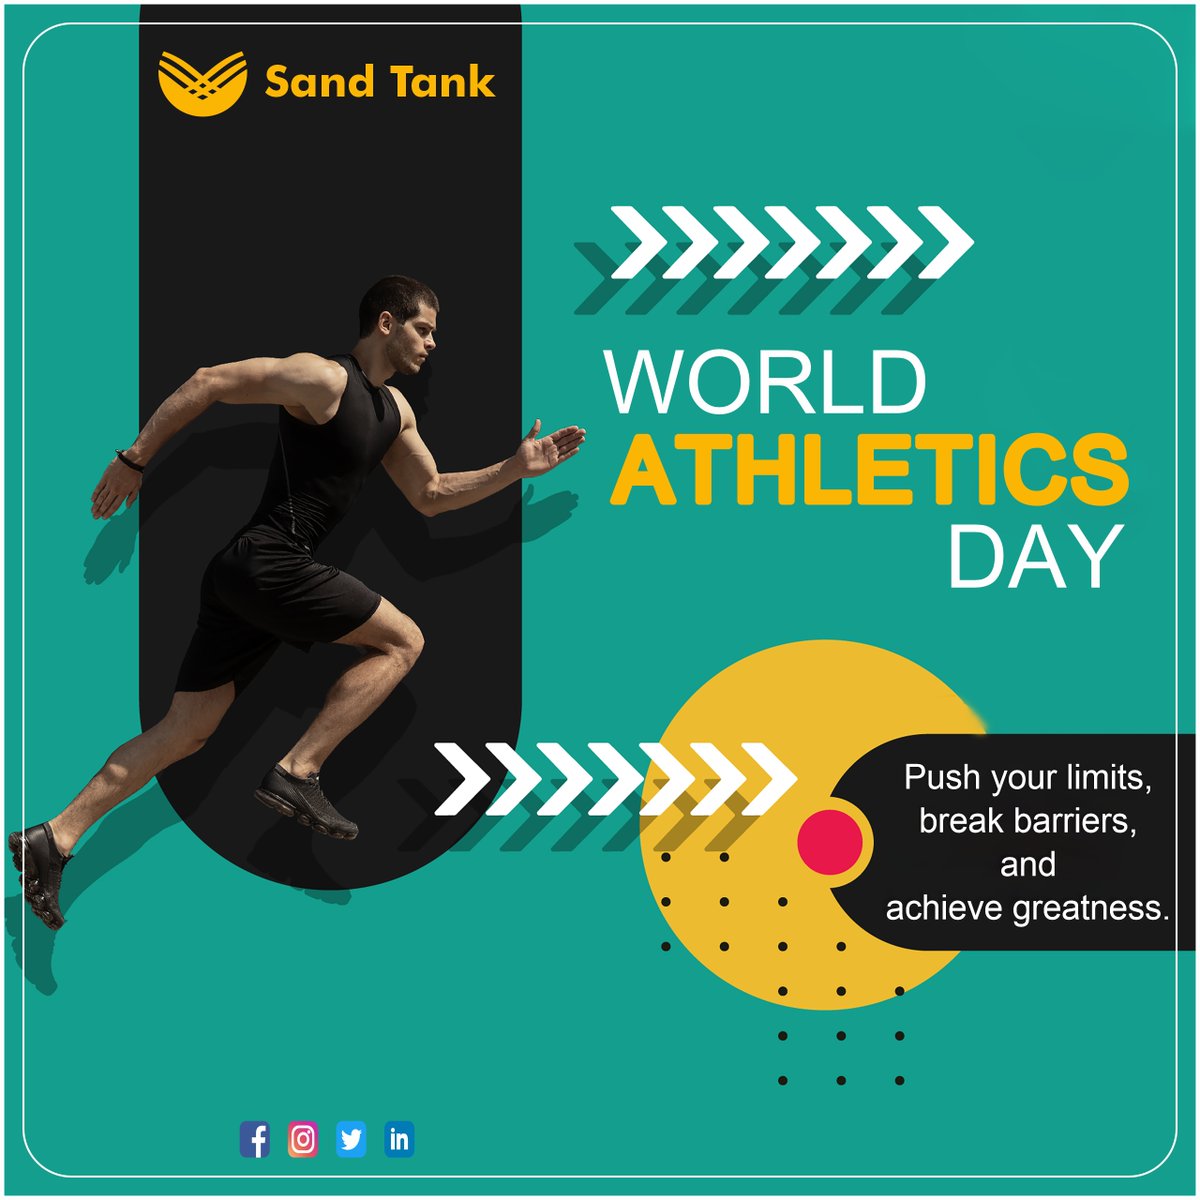 As we mark #WorldAthleticsDay, let's honor the athletes who push their limits, break barriers, and inspire us to strive for greatness. Here's to chasing dreams and setting new records! 

#Sandtankfoundation #WorldAthleticsDay #AthleticsDay #TrackAndField #AthleticsForAll